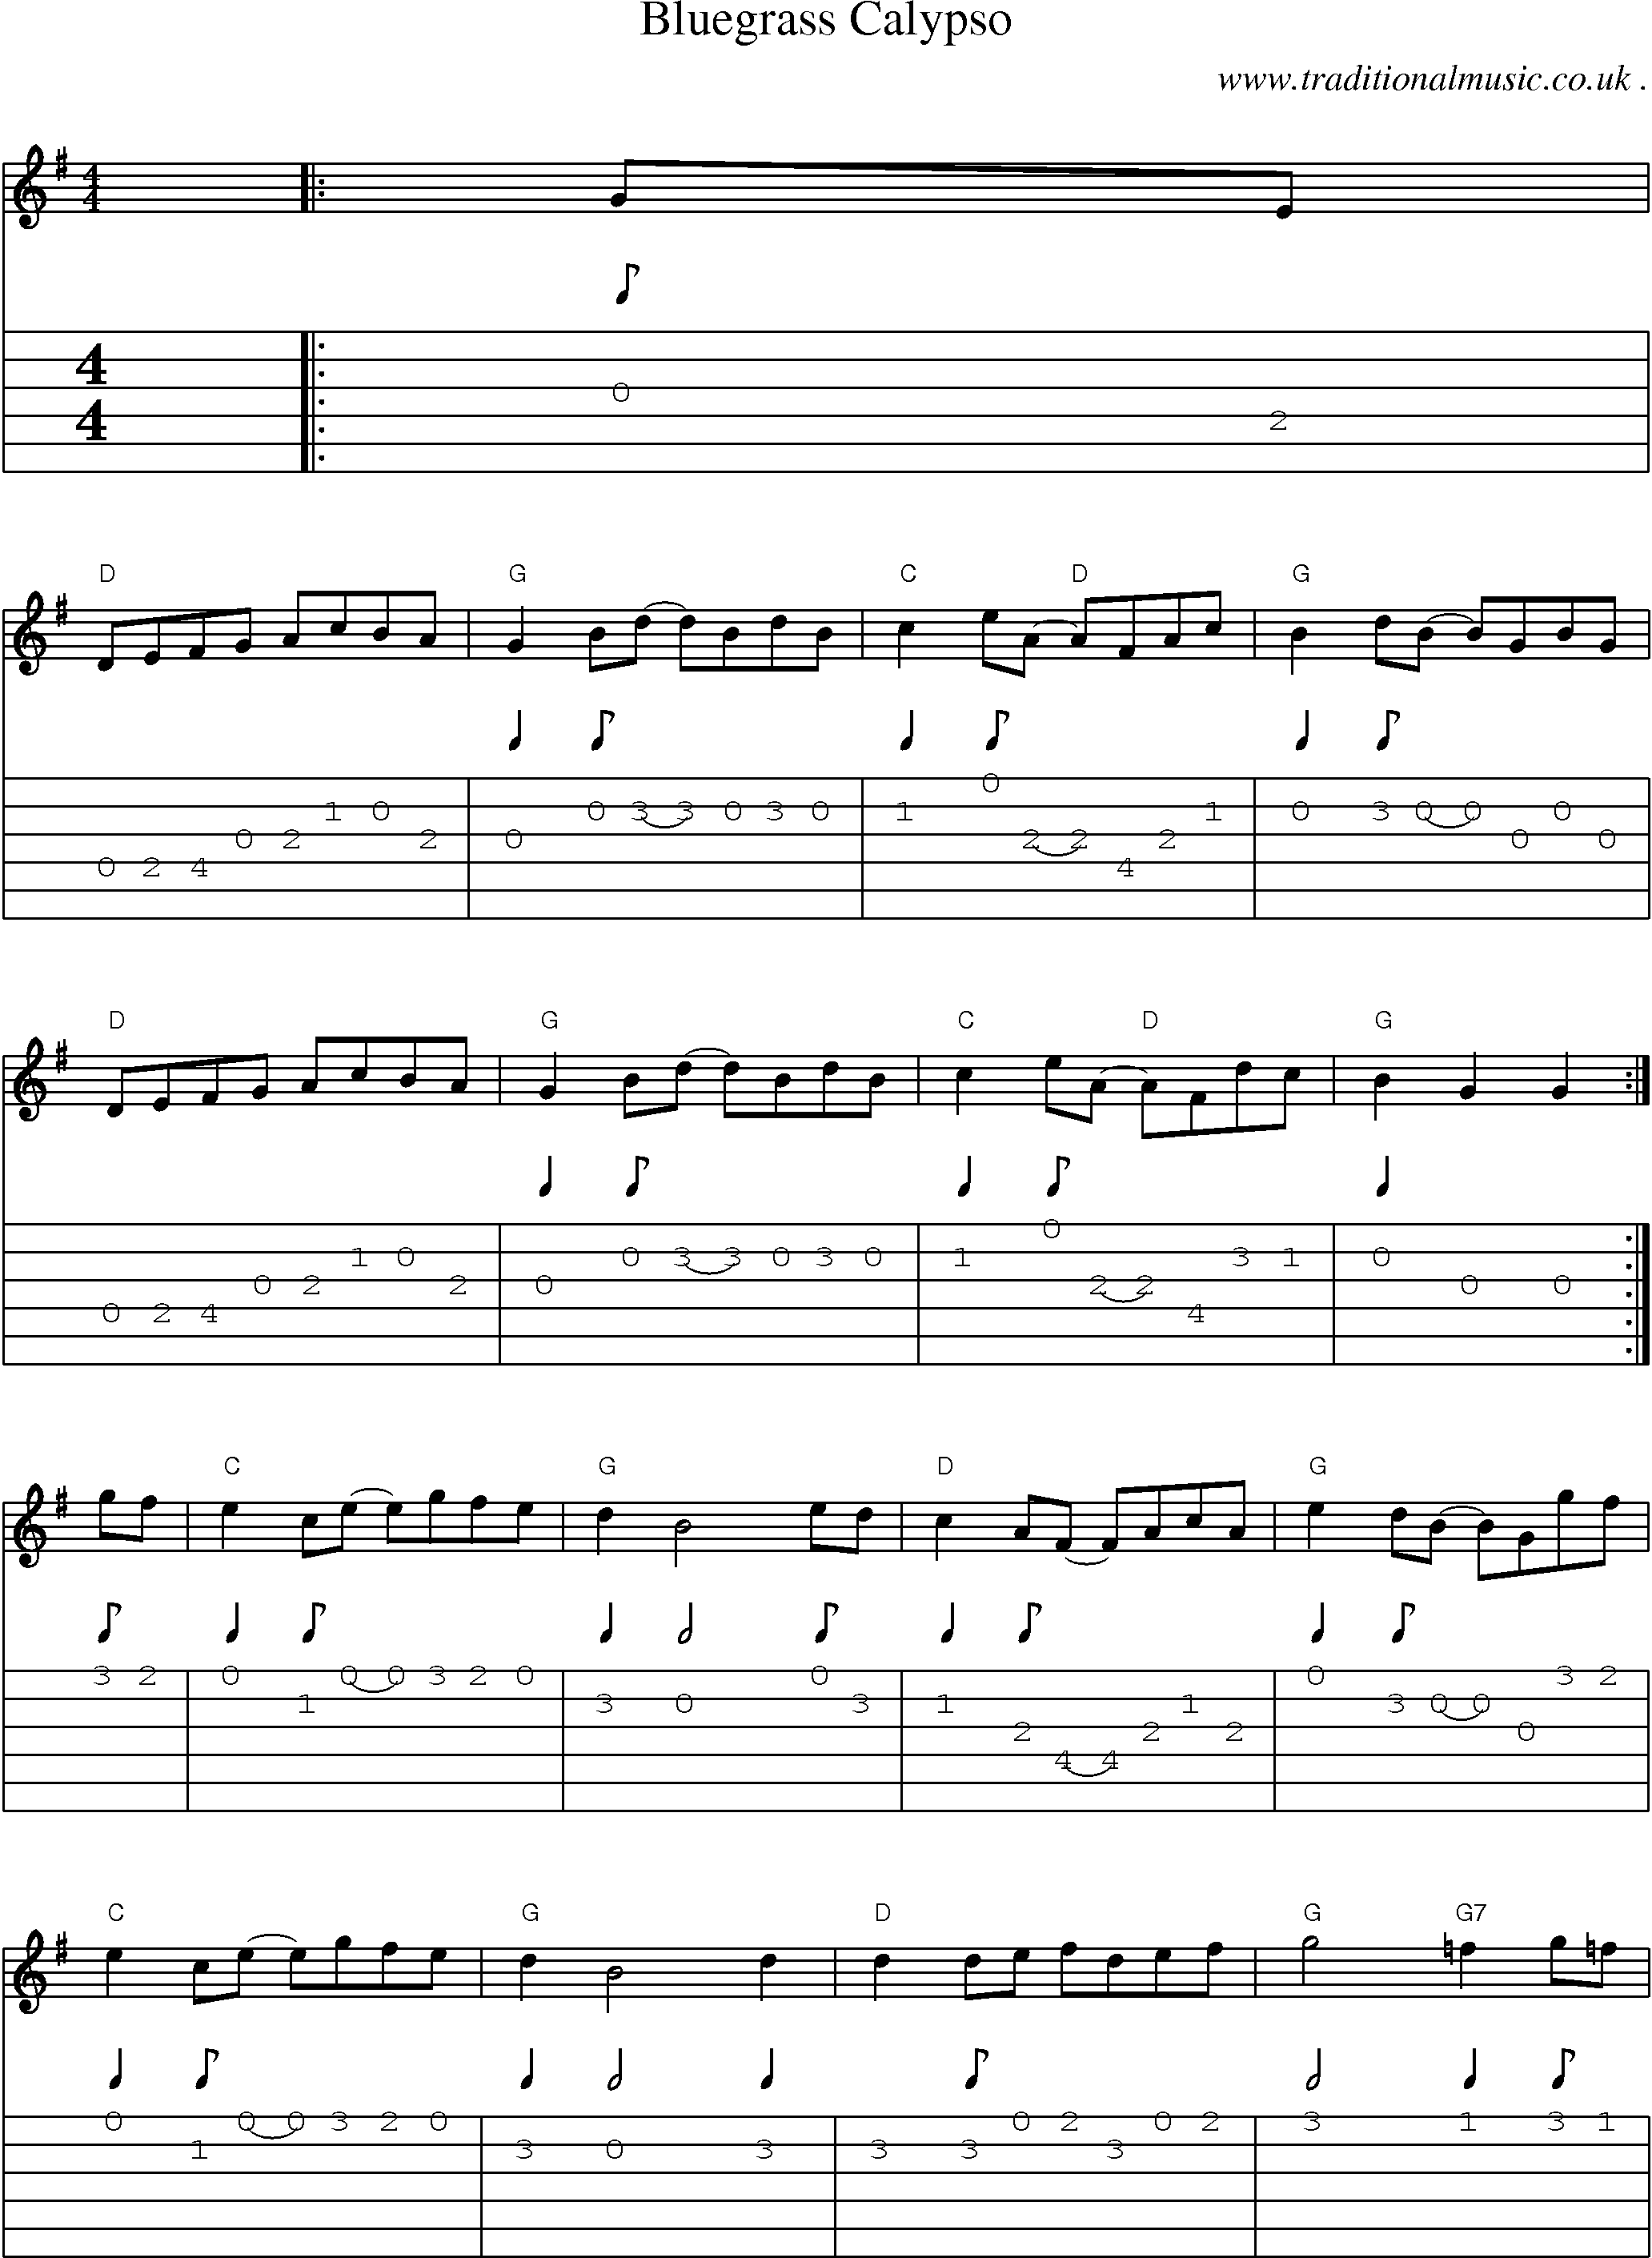 Music Score and Guitar Tabs for Bluegrass Calypso